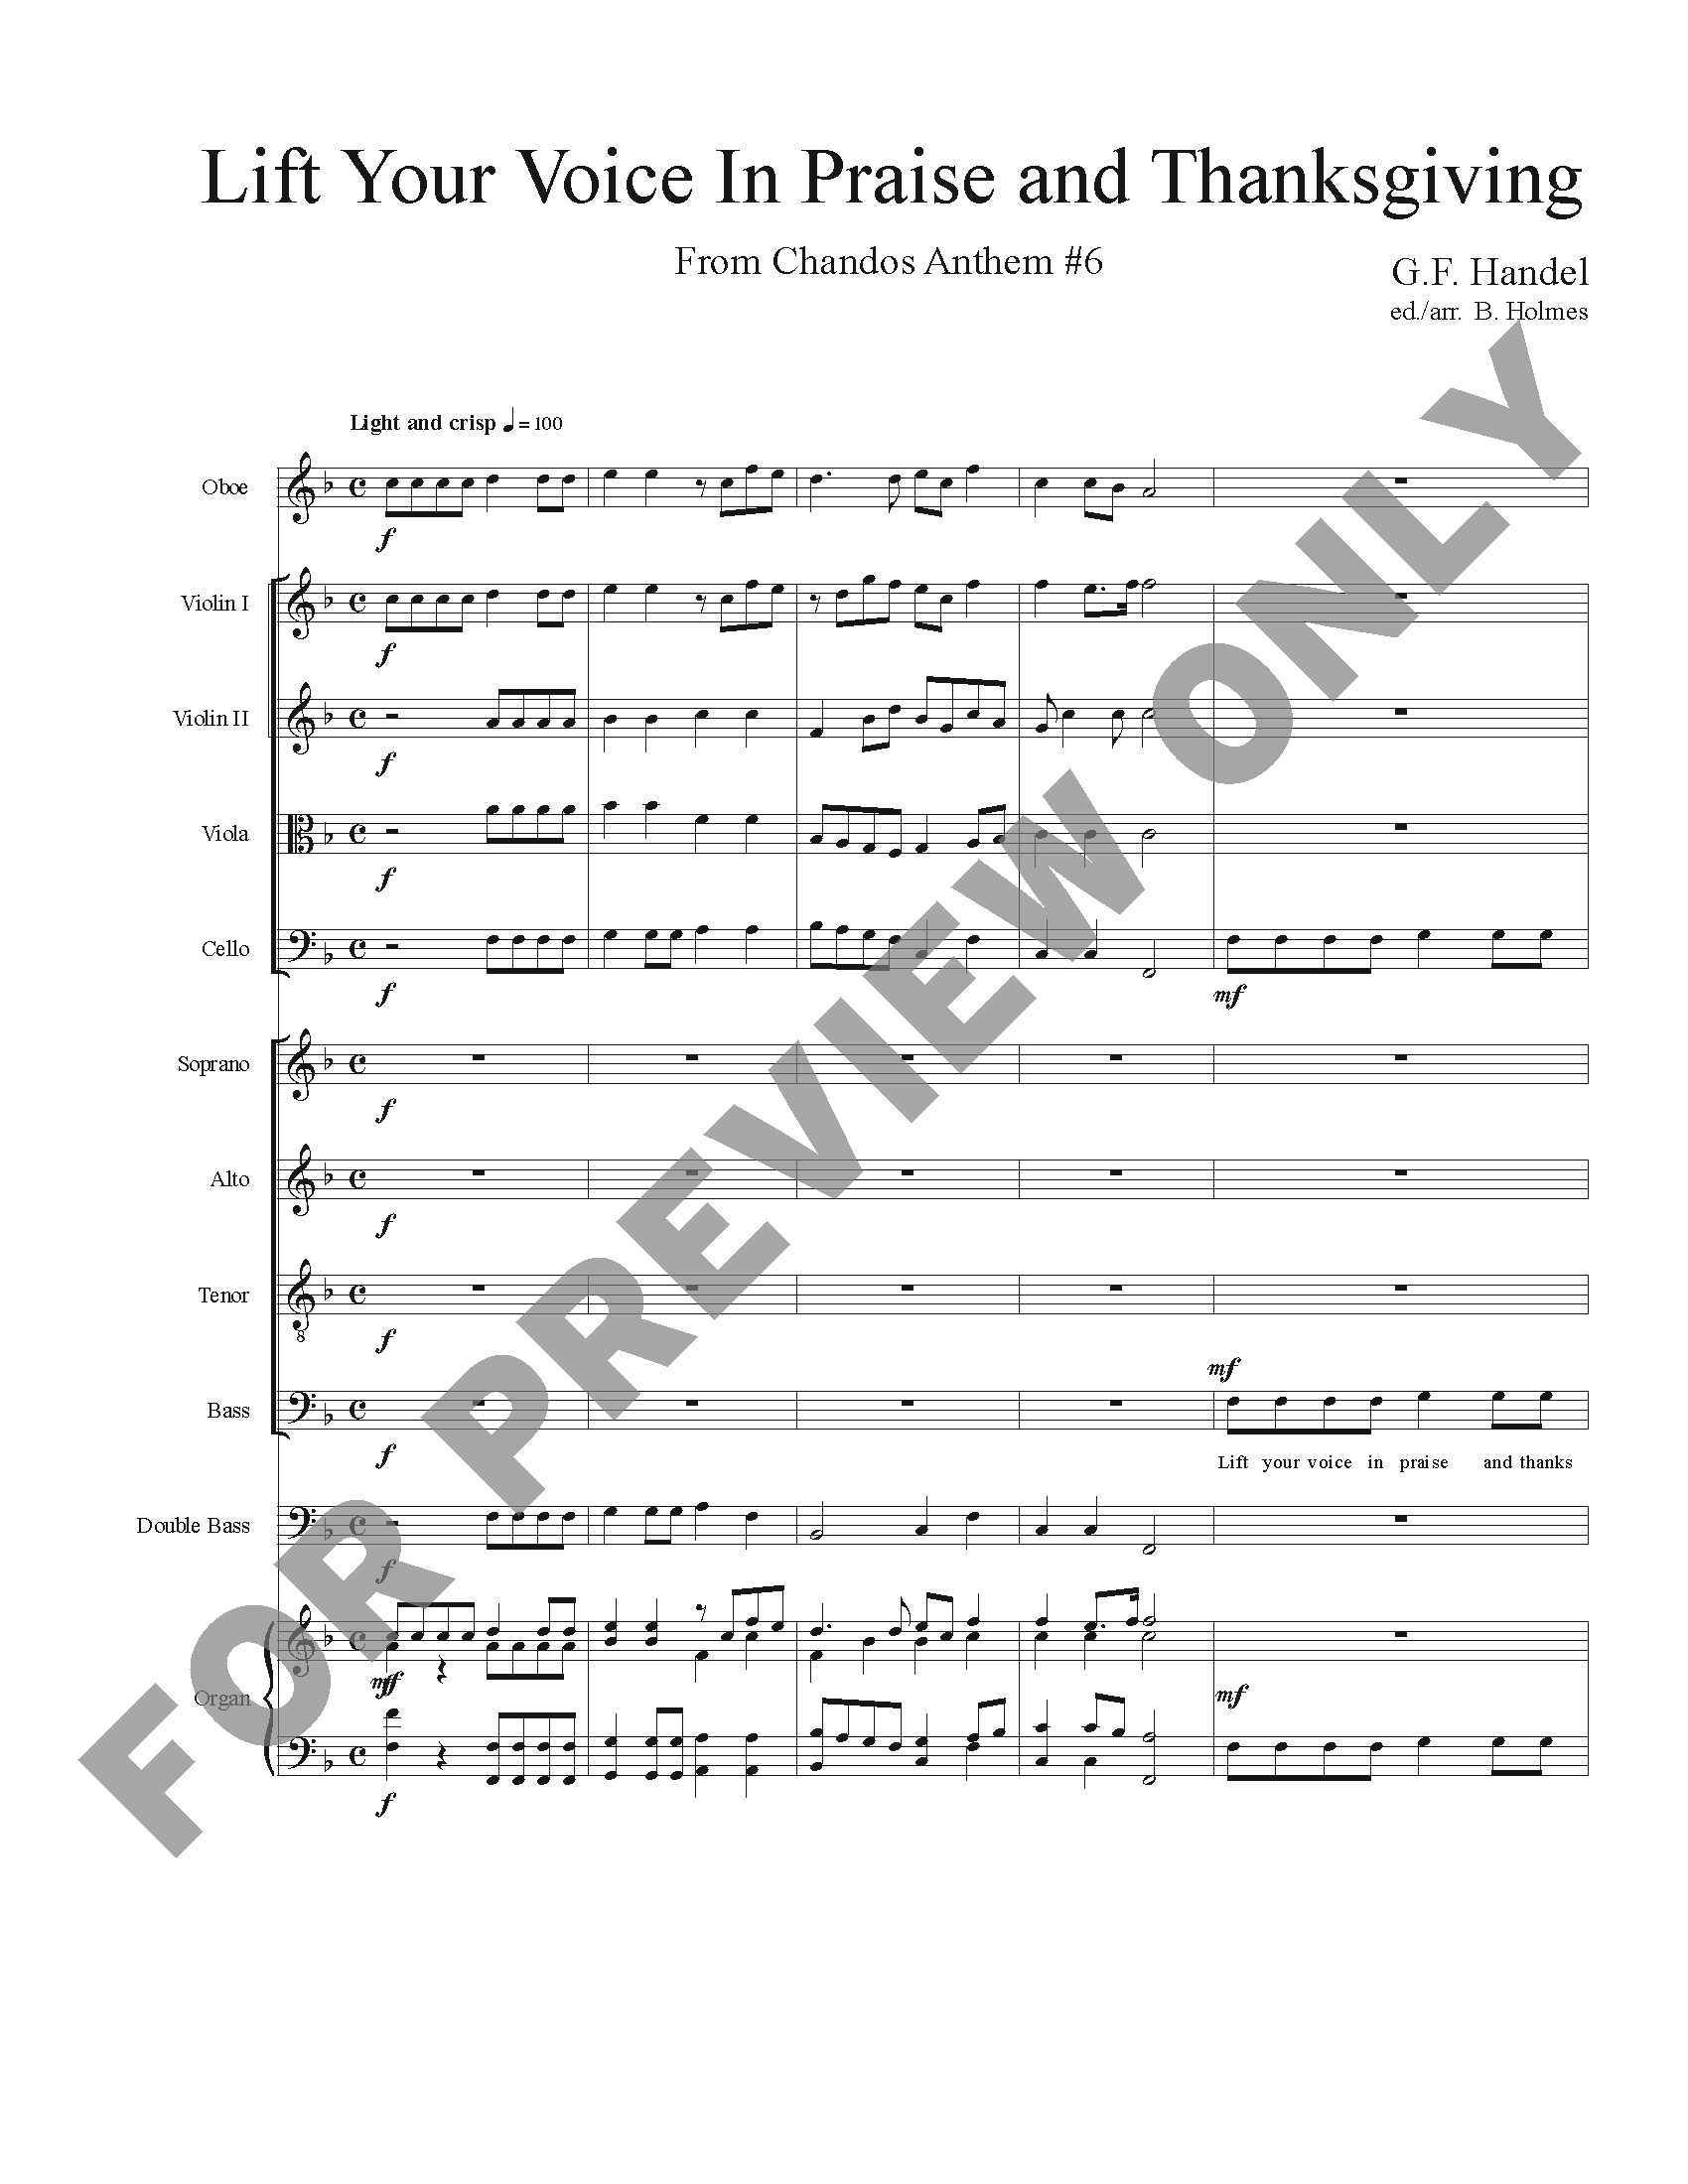 lift-your-voice-score_perusal_Page_07